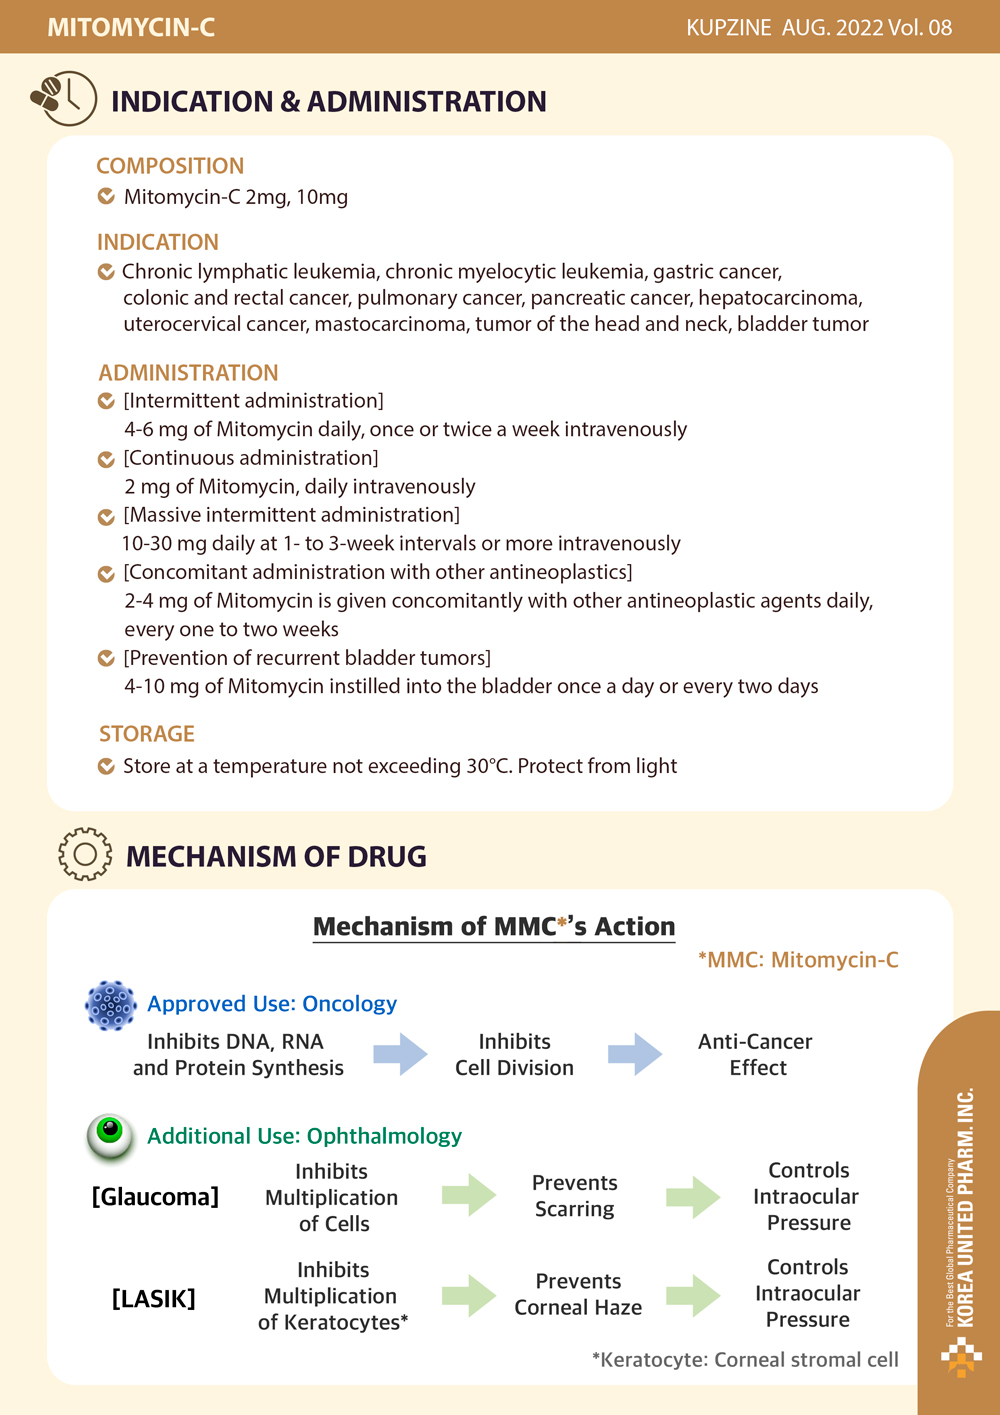 Indication, administration and mechanism of Mitomycin-C.